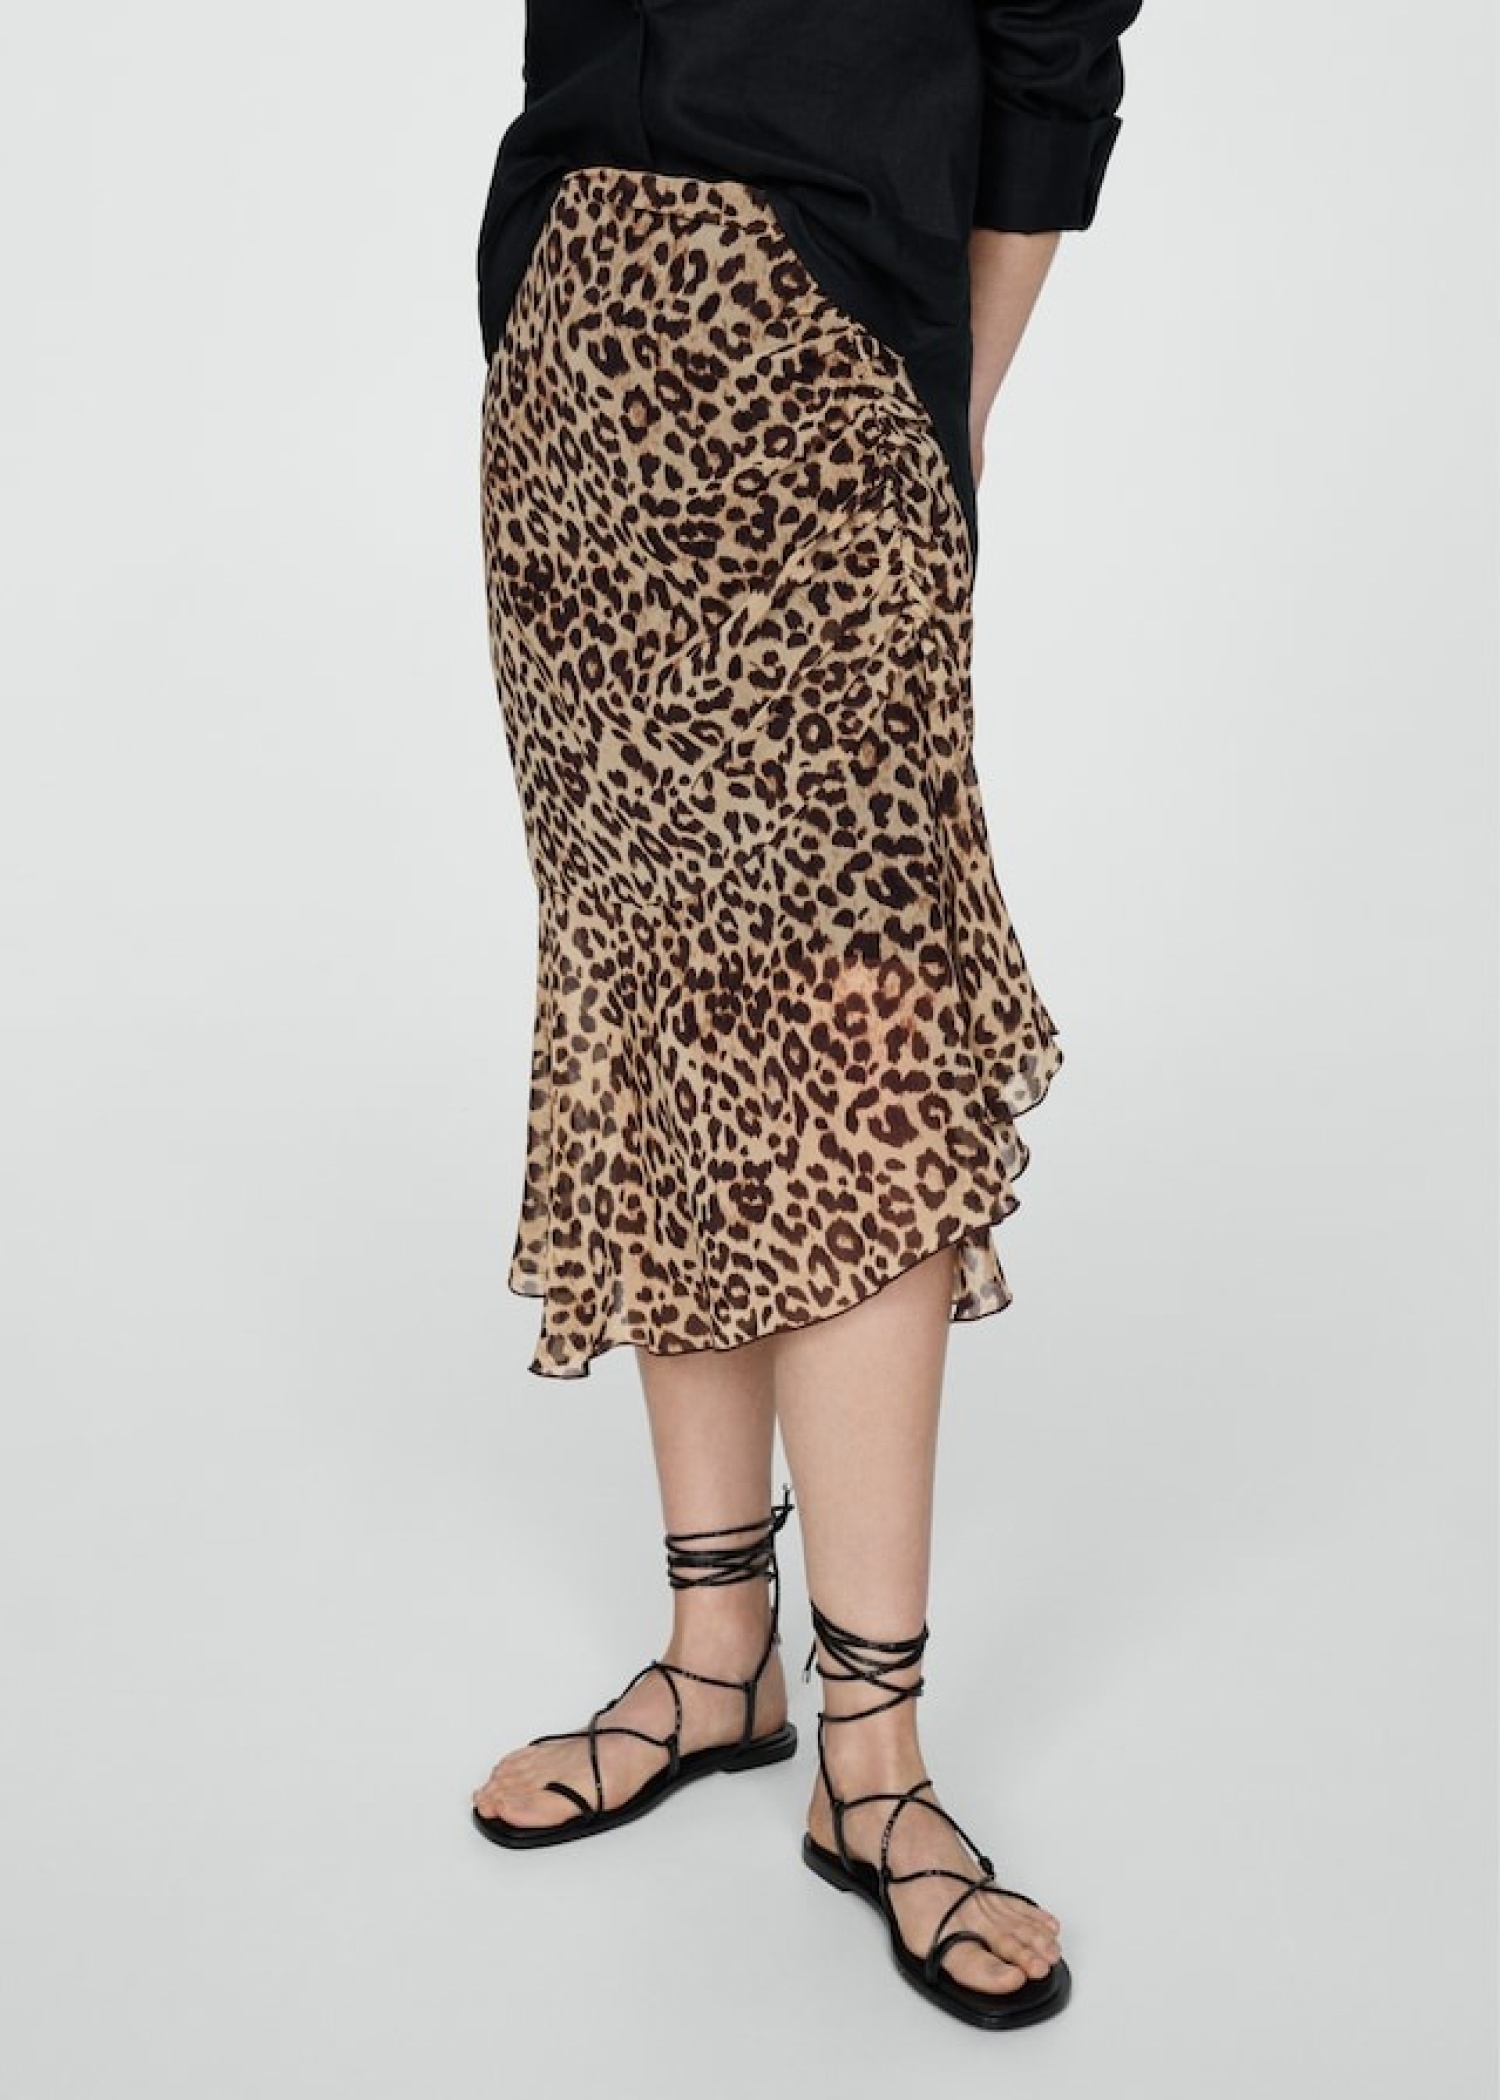 Woman combining an animal print skirt with sandals and a black blouse.